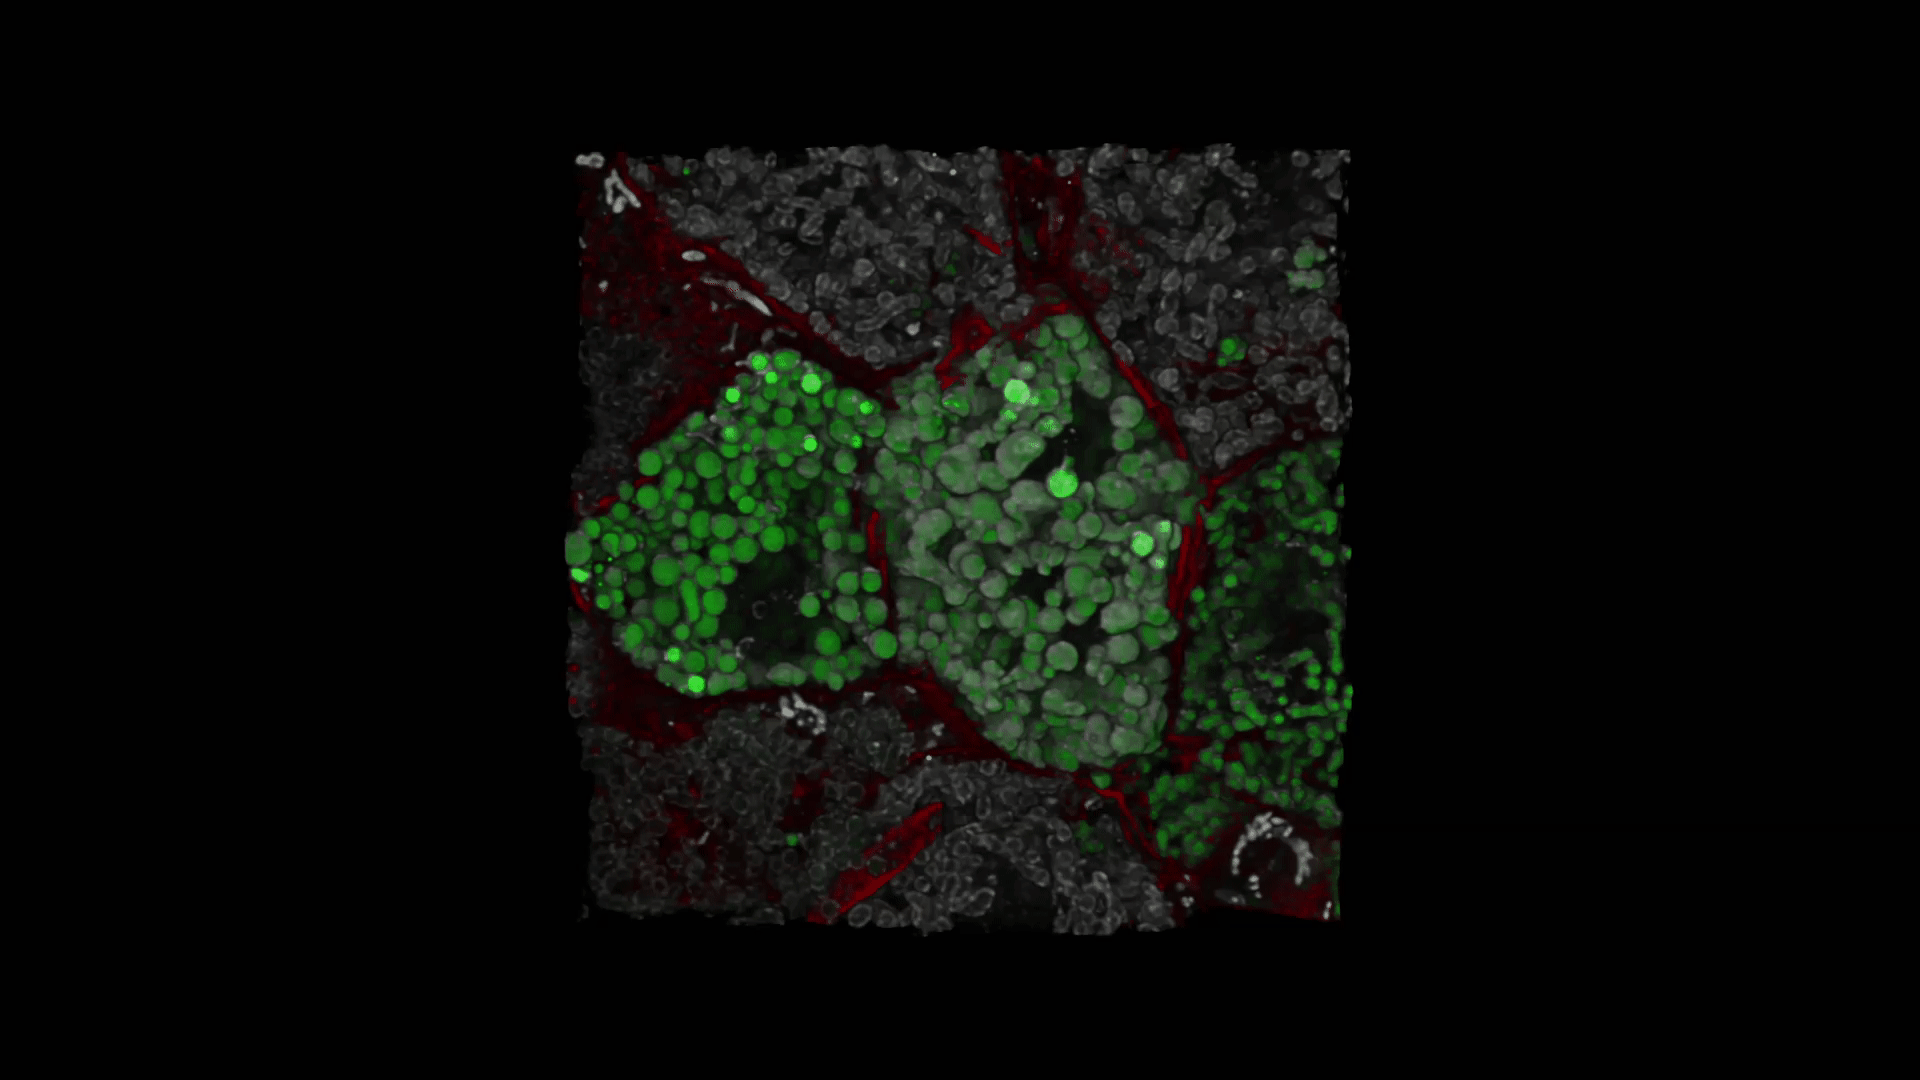 3D reconstruction of hepatic mitochondria in the intact tissue. mitochondria matrix (green), mitochondria outer membrane (white), actin (red).